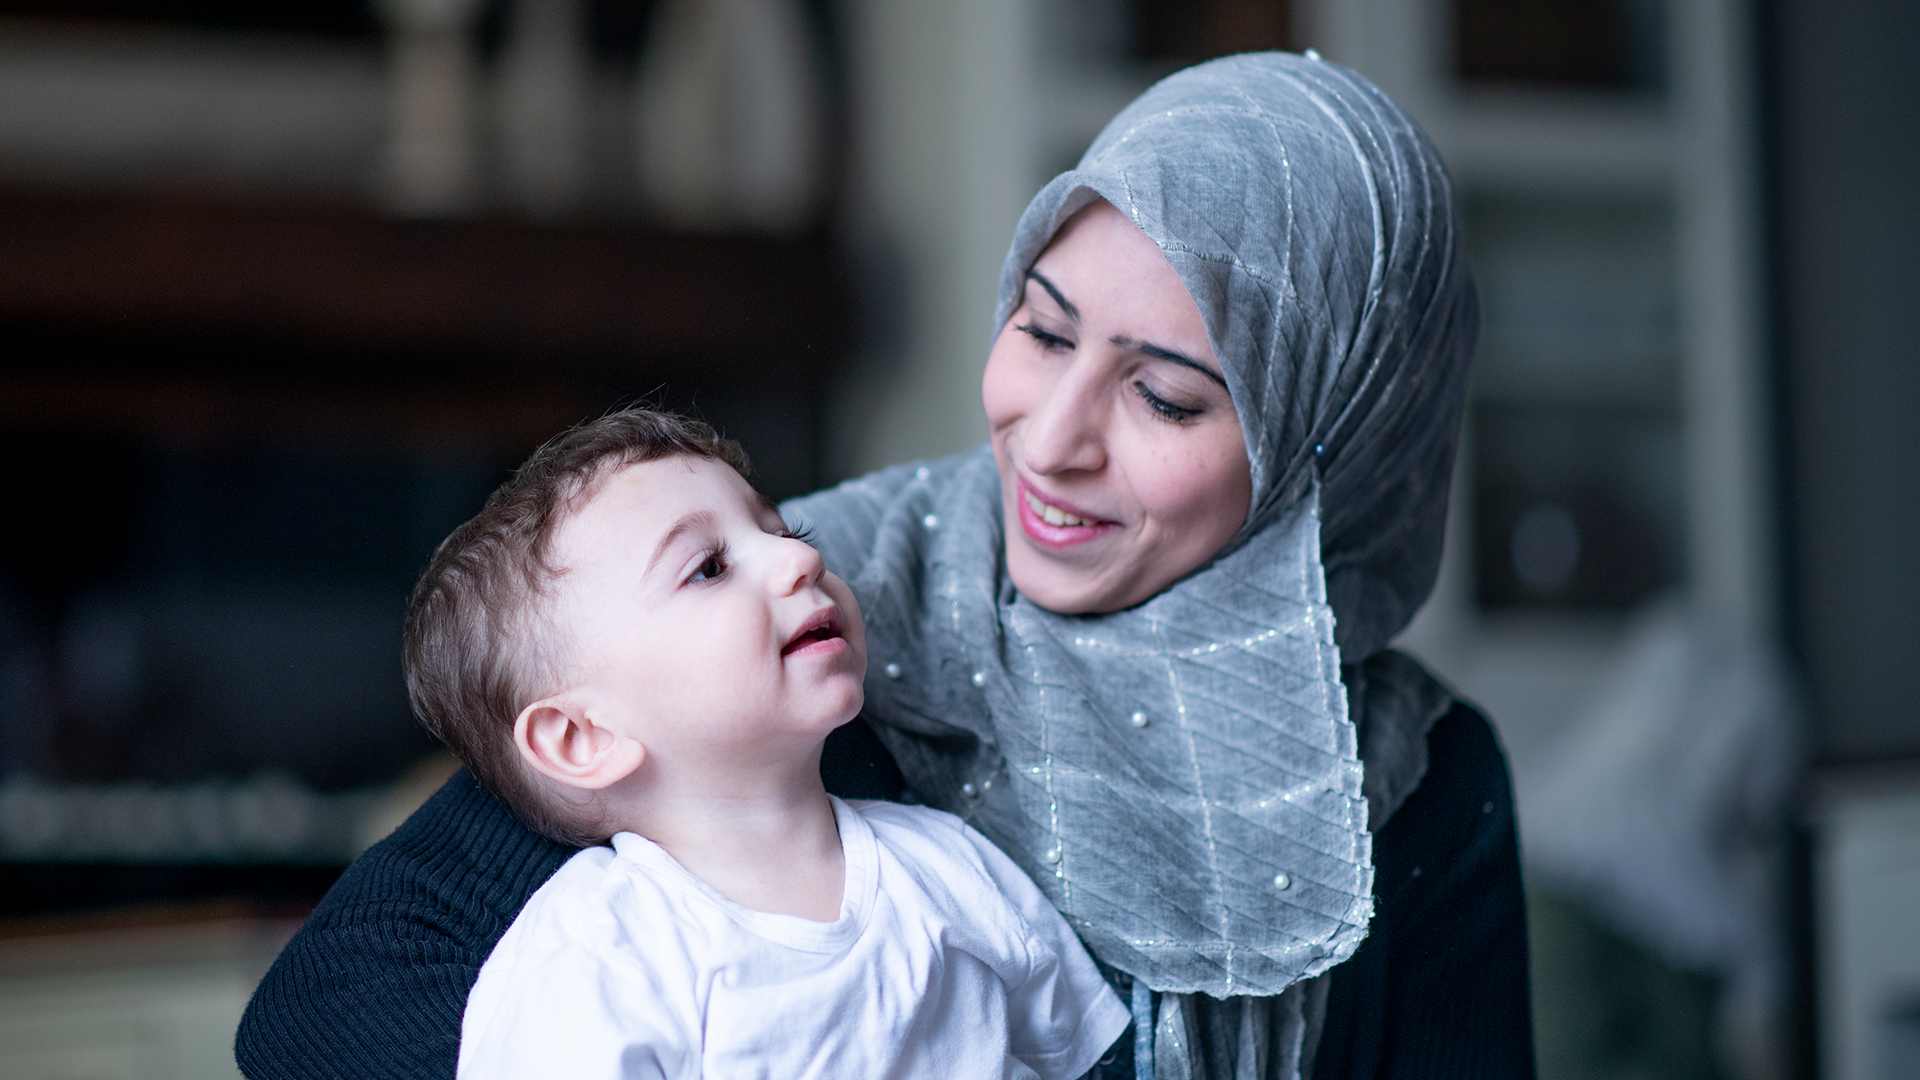 Picture of Muslim mother wearing blue-grey hijab looking lovingly at toddler son in her lap wearing white shirt